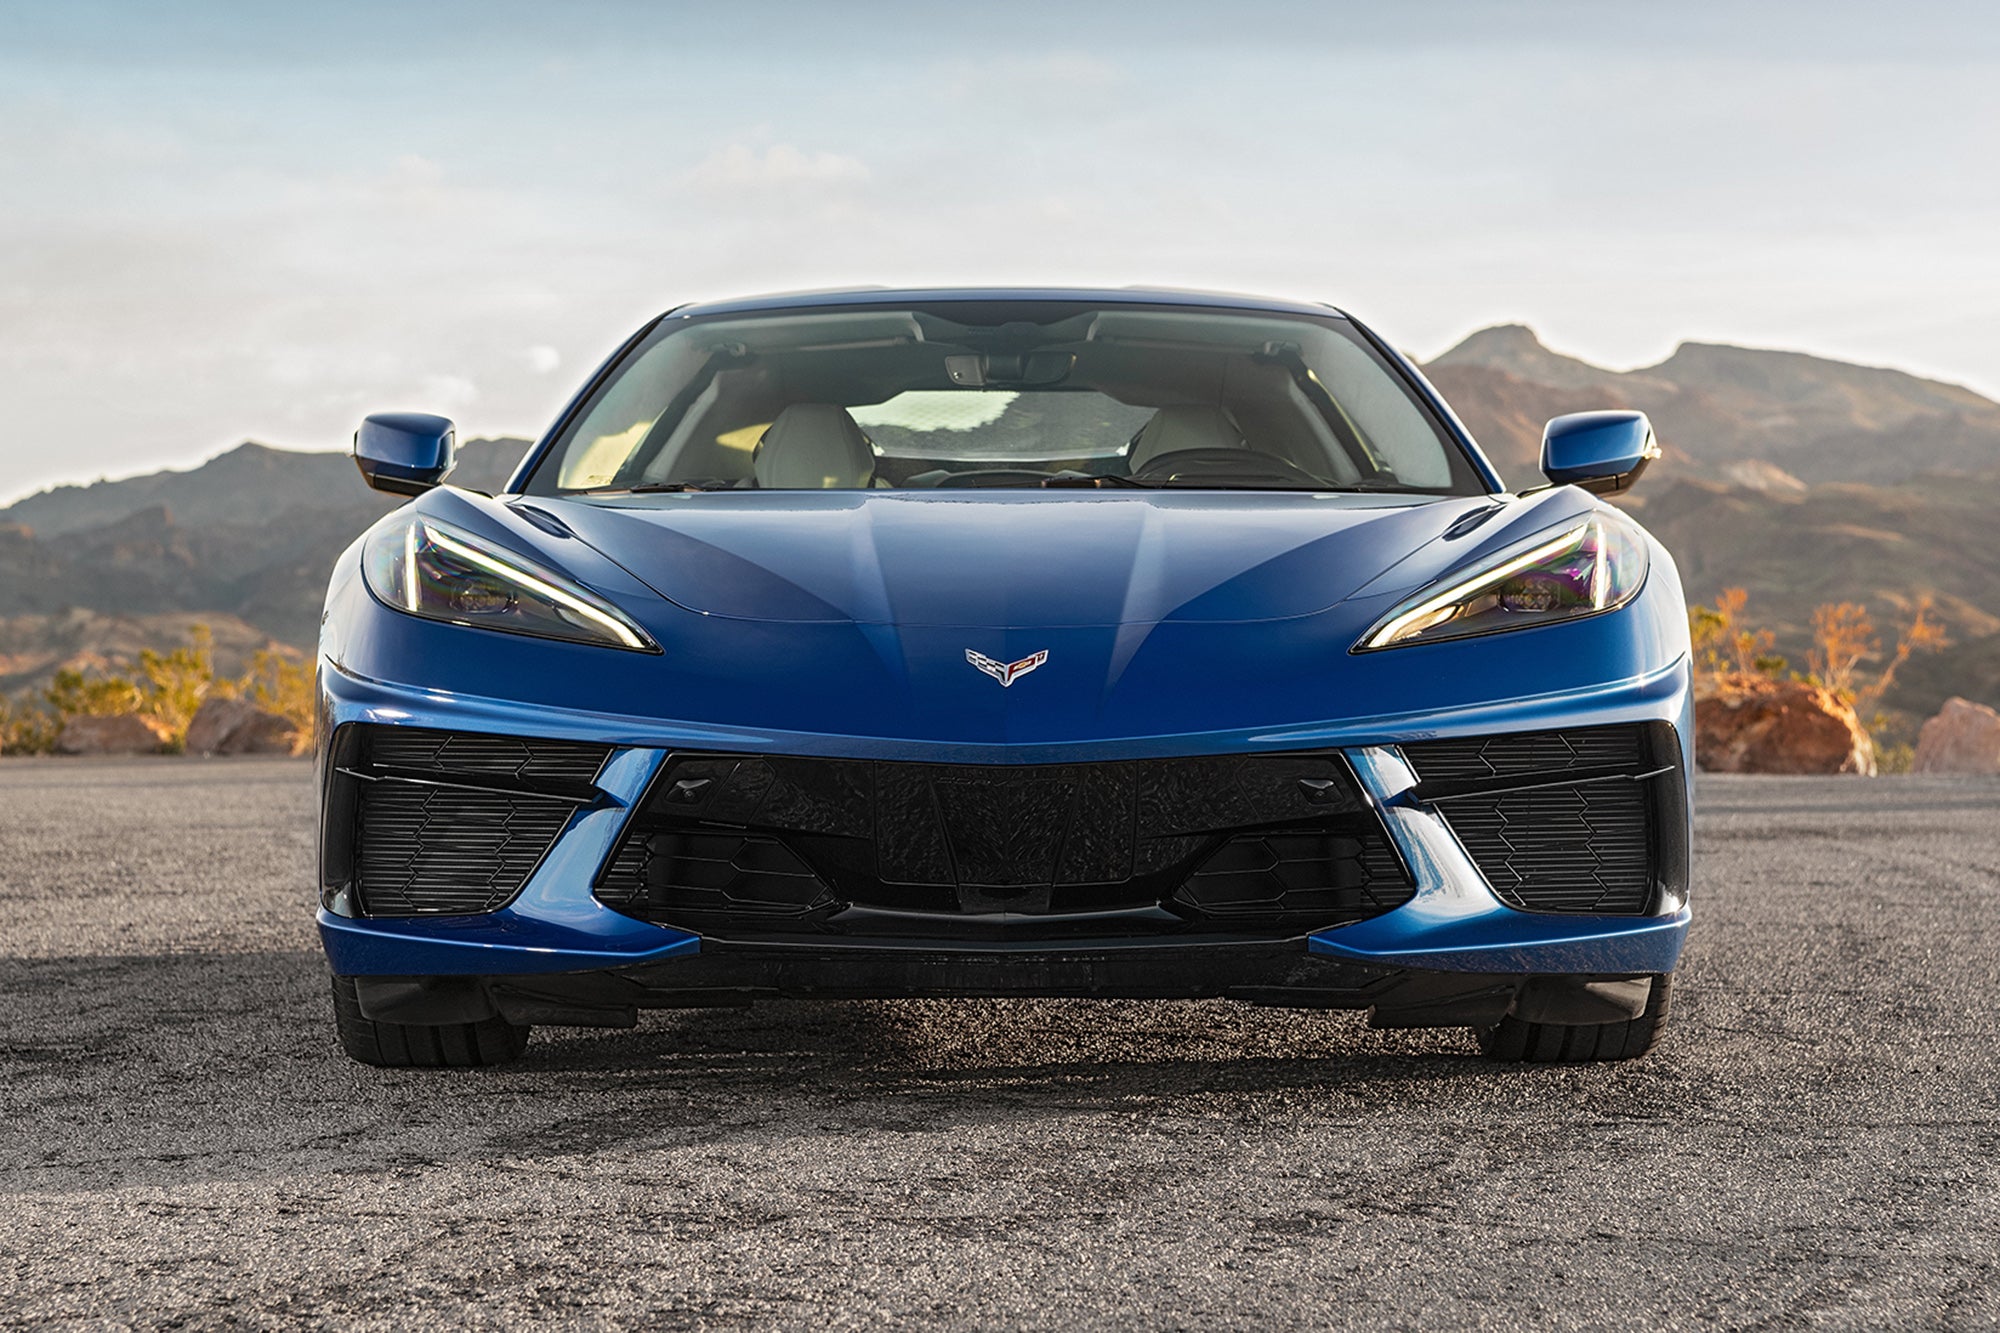 2020 Chevrolet Corvette Stingray Review: A Mid-Engine Marvel That Won't  Tear Your Face Off (Yet)